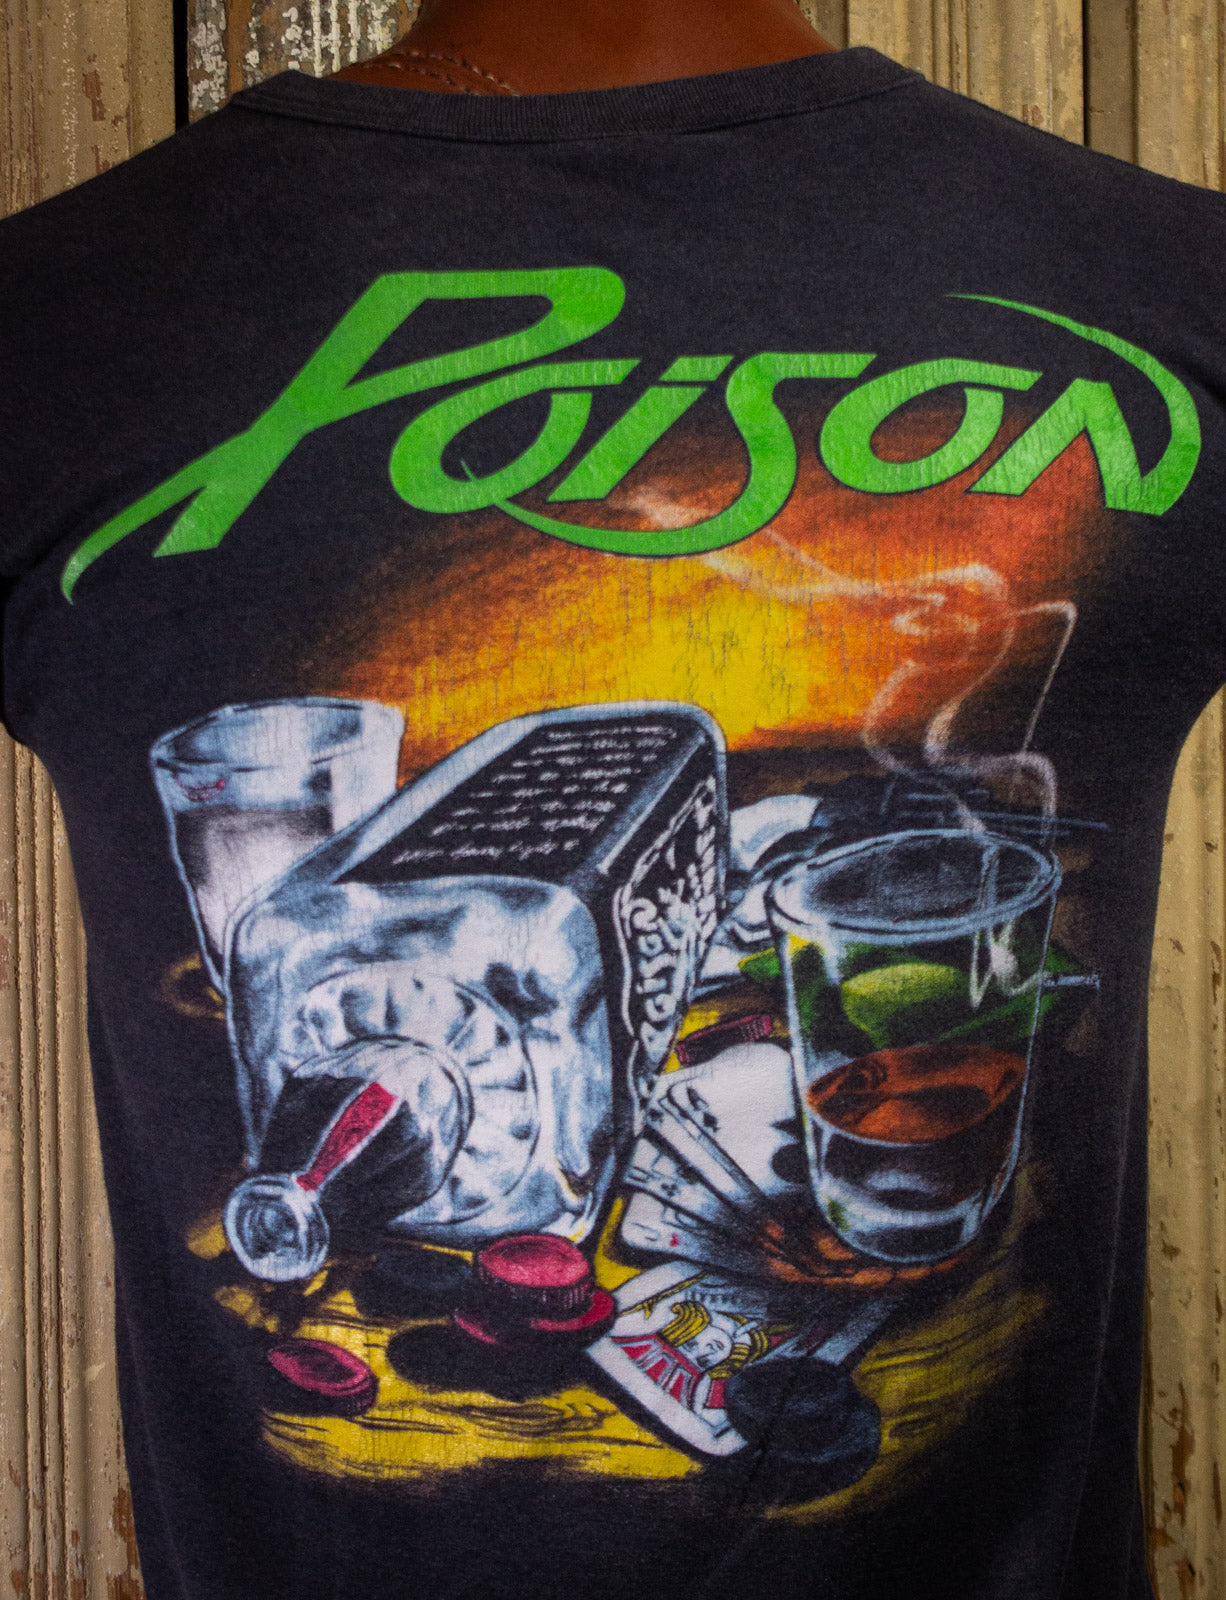 Vintage Poison Nothing But A Good Time Concert T shirt 1988 Large